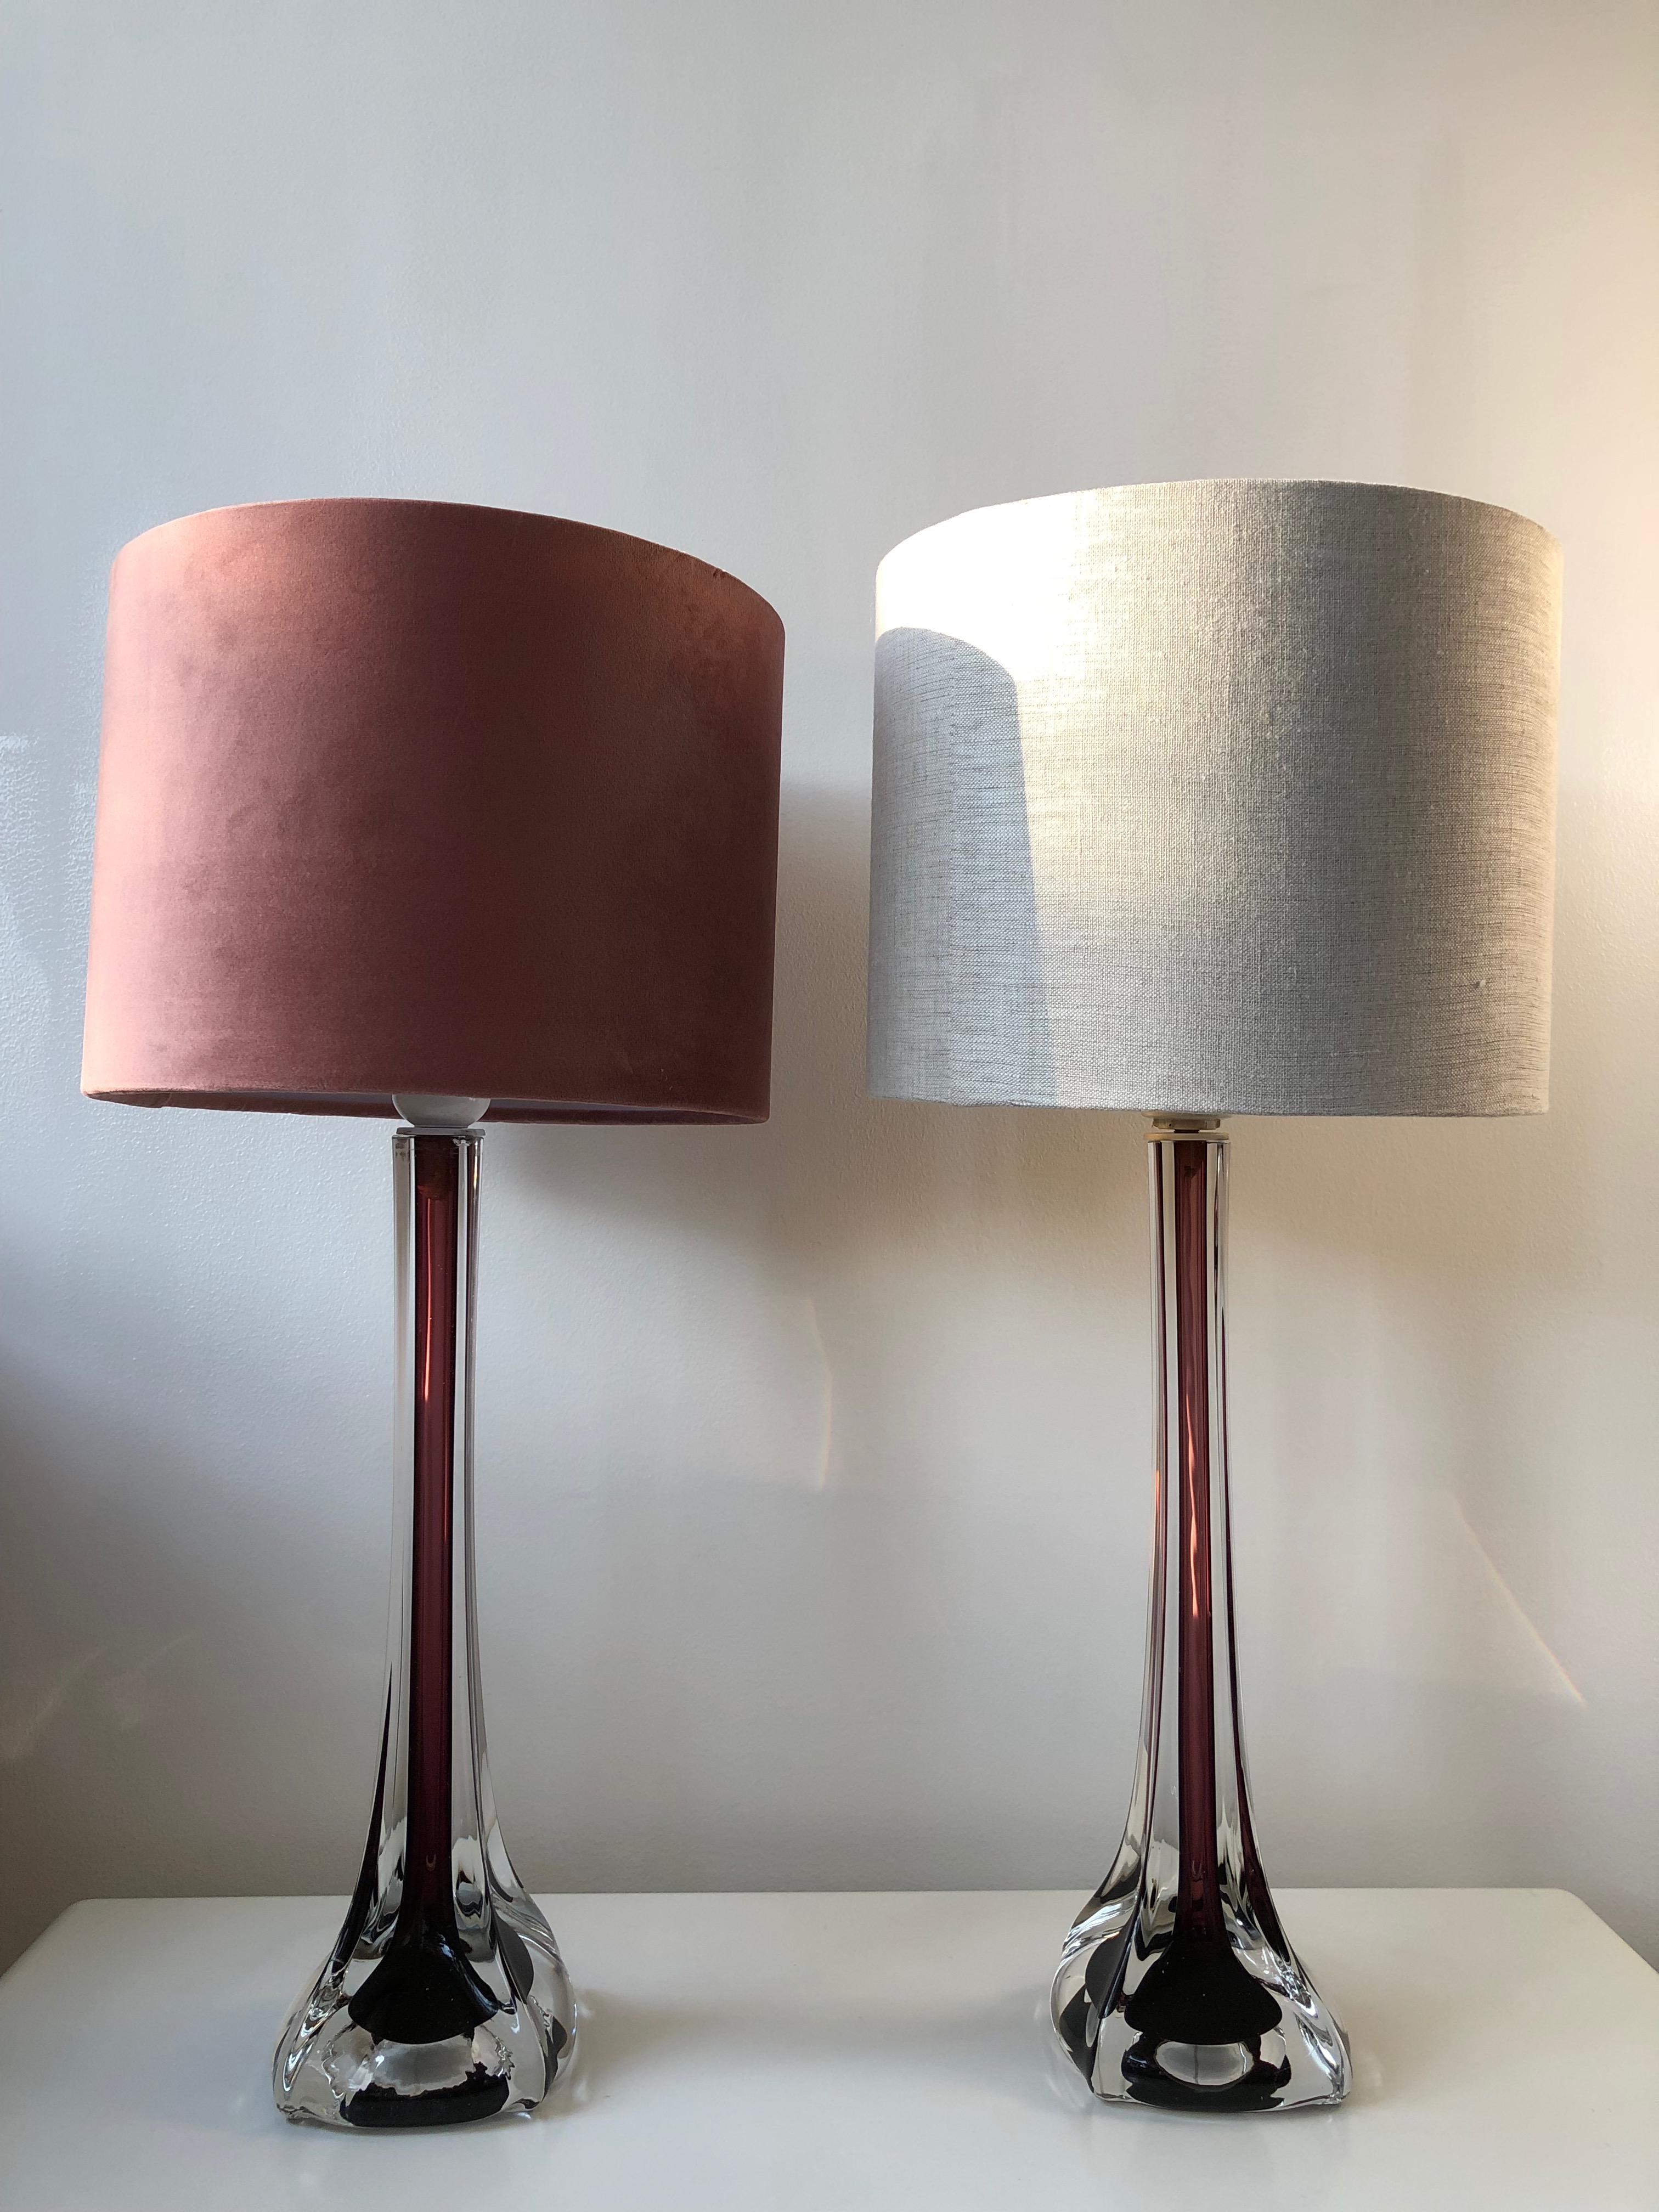 A pair of elegant Swedish Mid-Century Modern Sommerso style table lamps in hour glass form. Two tone glass in burgundy and clear glass in Murano Sommerso style. Pieces of art glass! 
Design by Swedish Flygsfors' Paul Kedelv and part of his